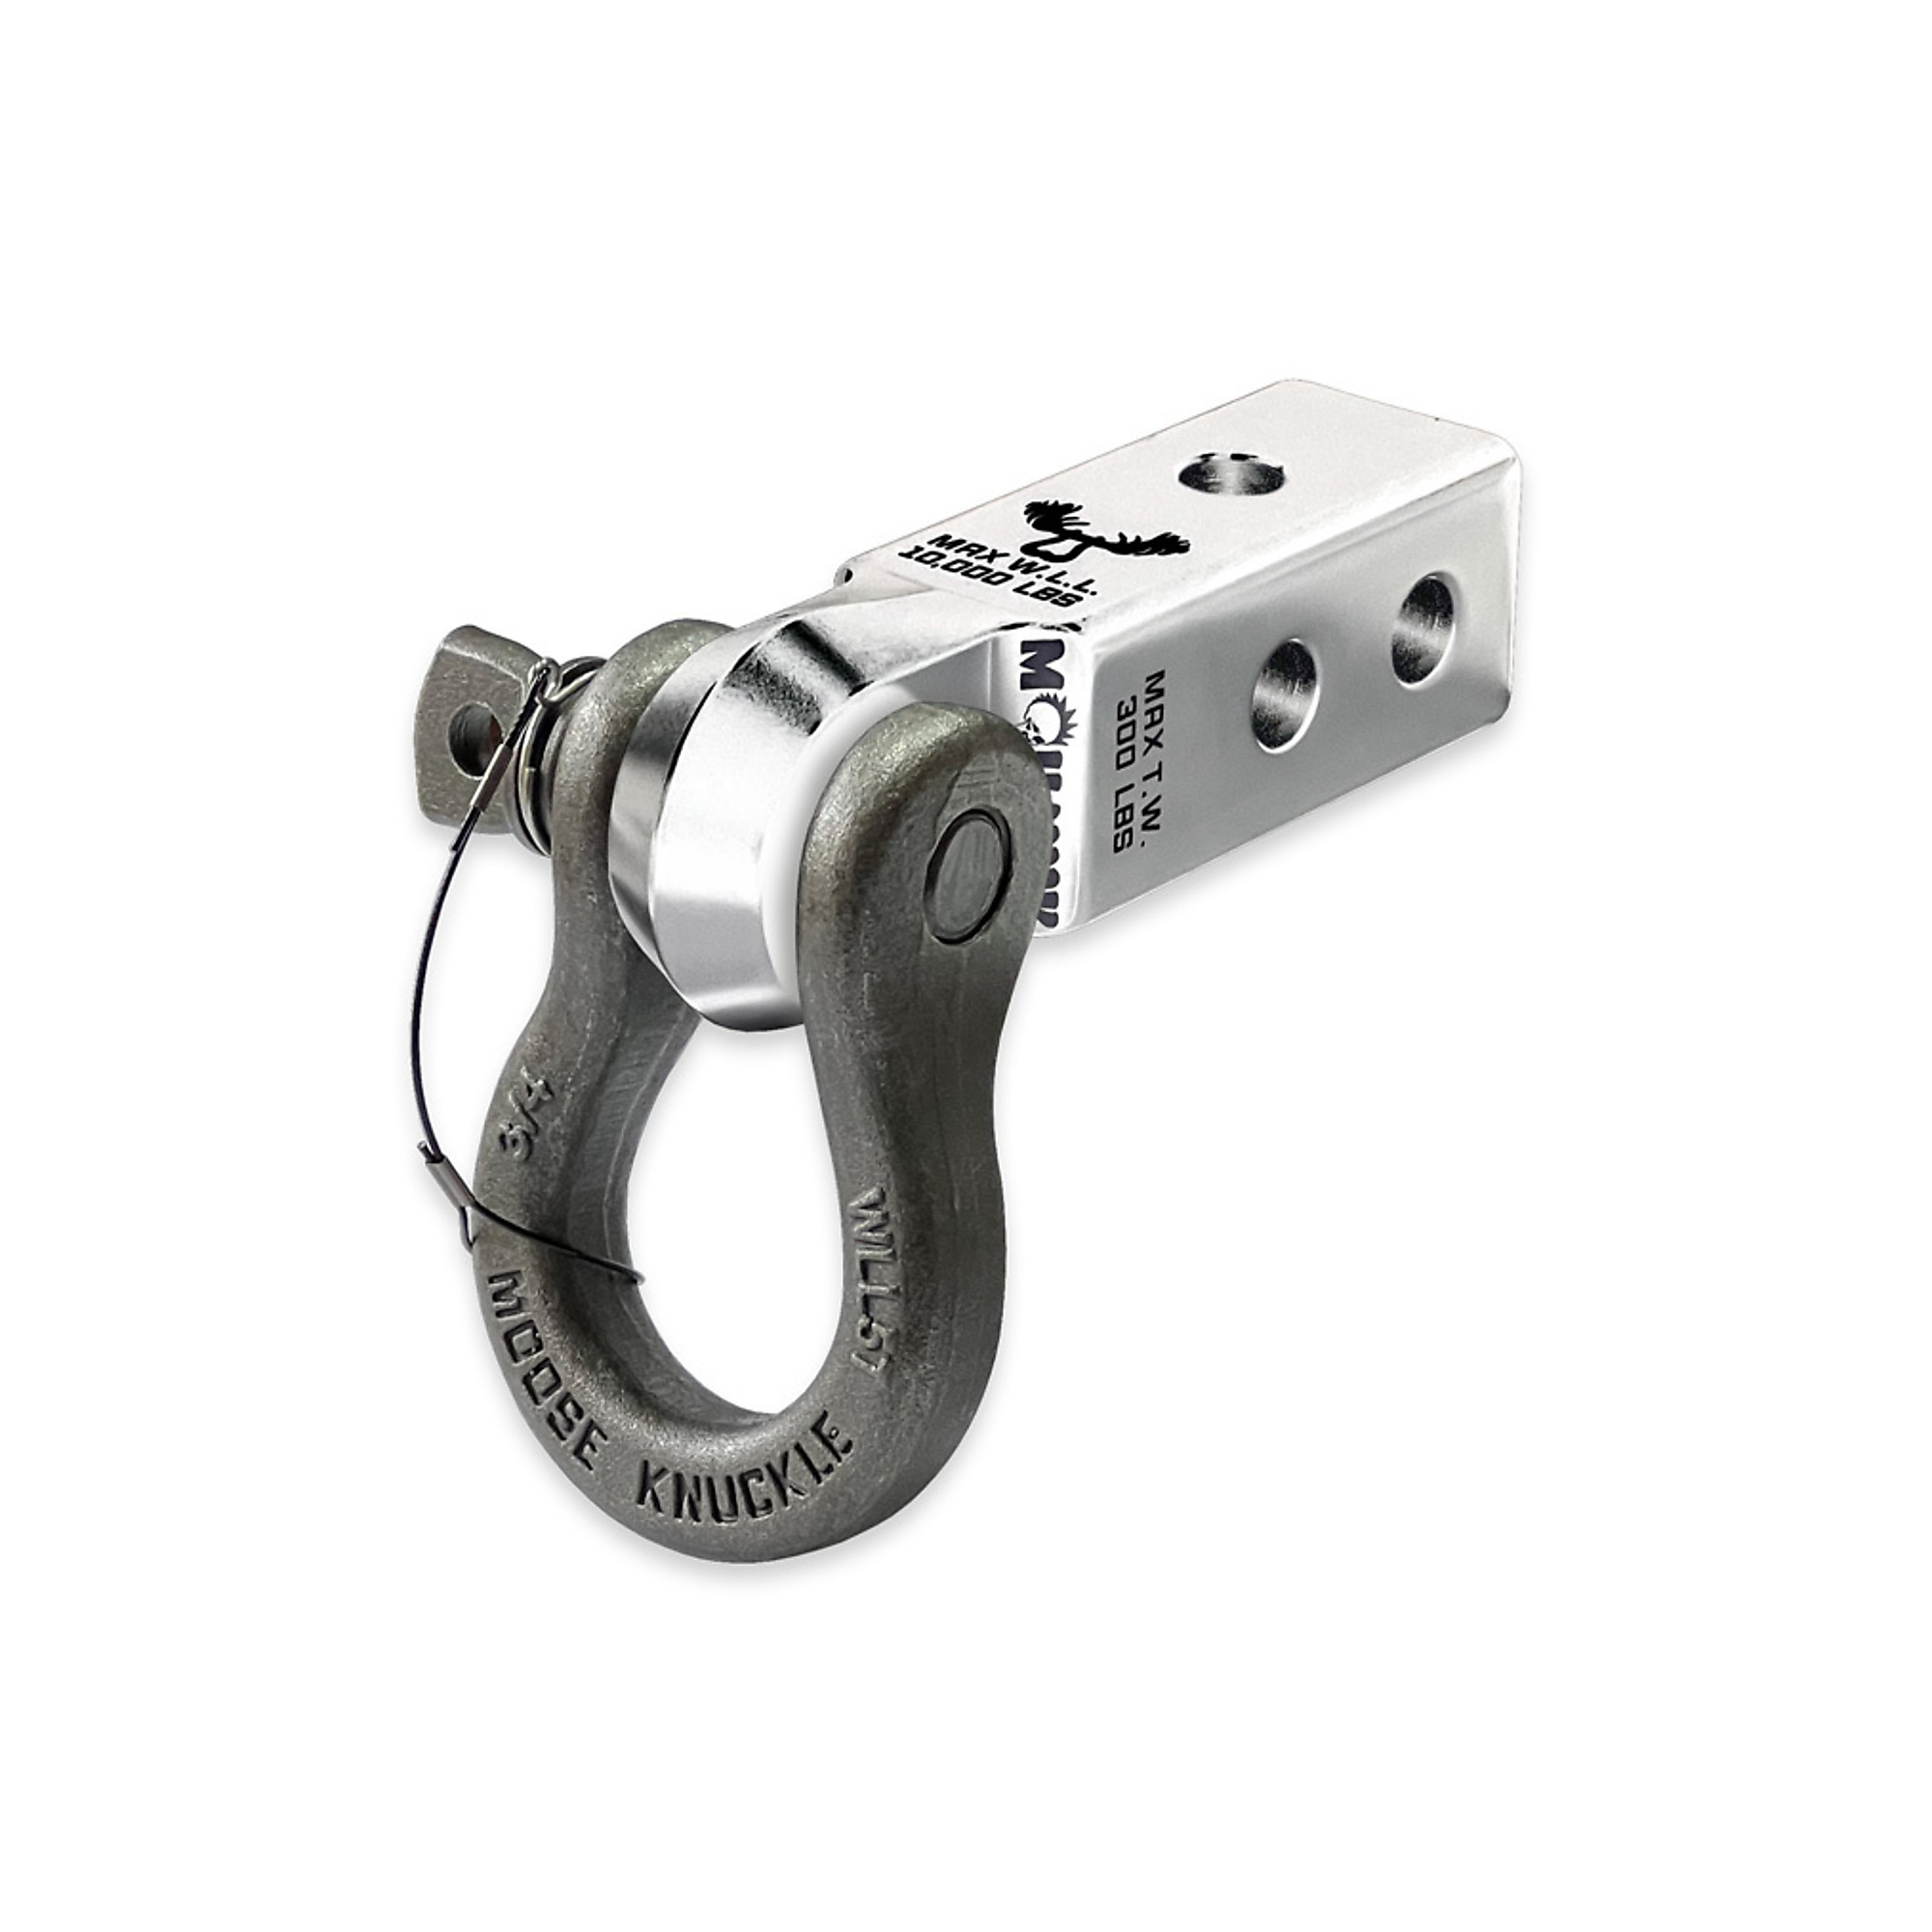 Moose Knuckle Offroad, 3/4 B'oh Spin Pin Shackle and Mohawk 2.0 Receiver  Combo, Model# FN000034-014